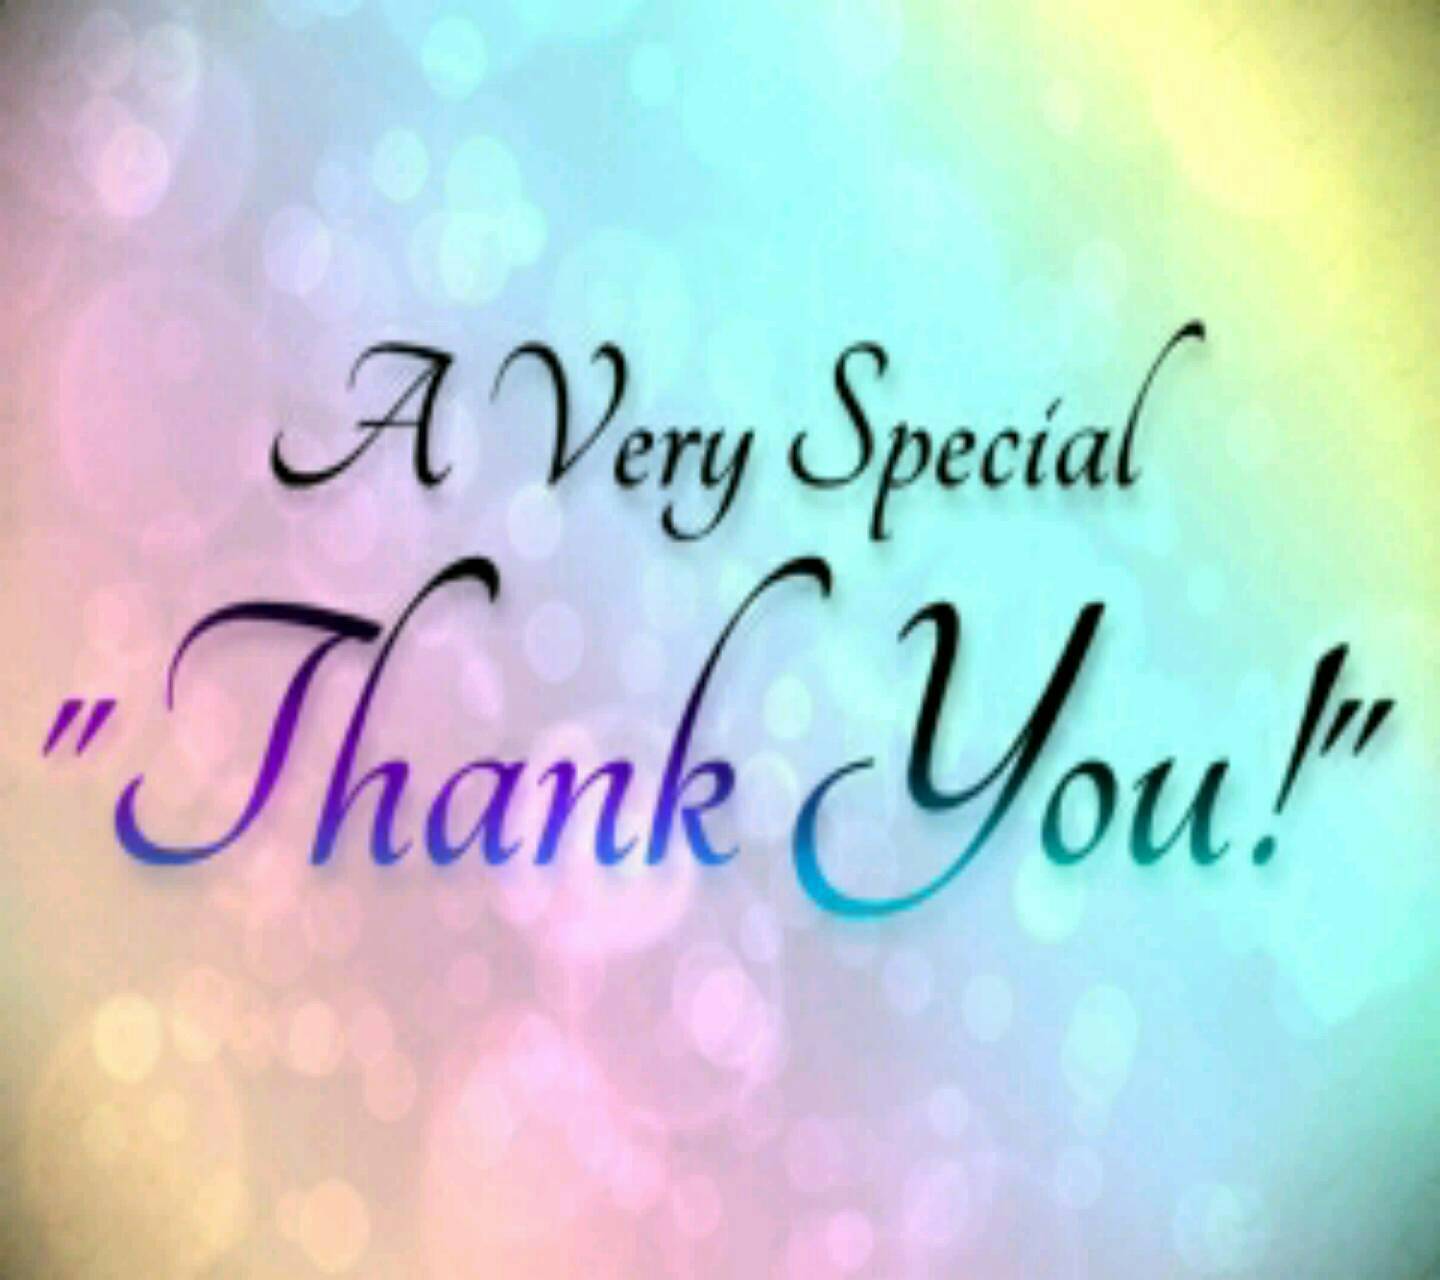 Special thanks to